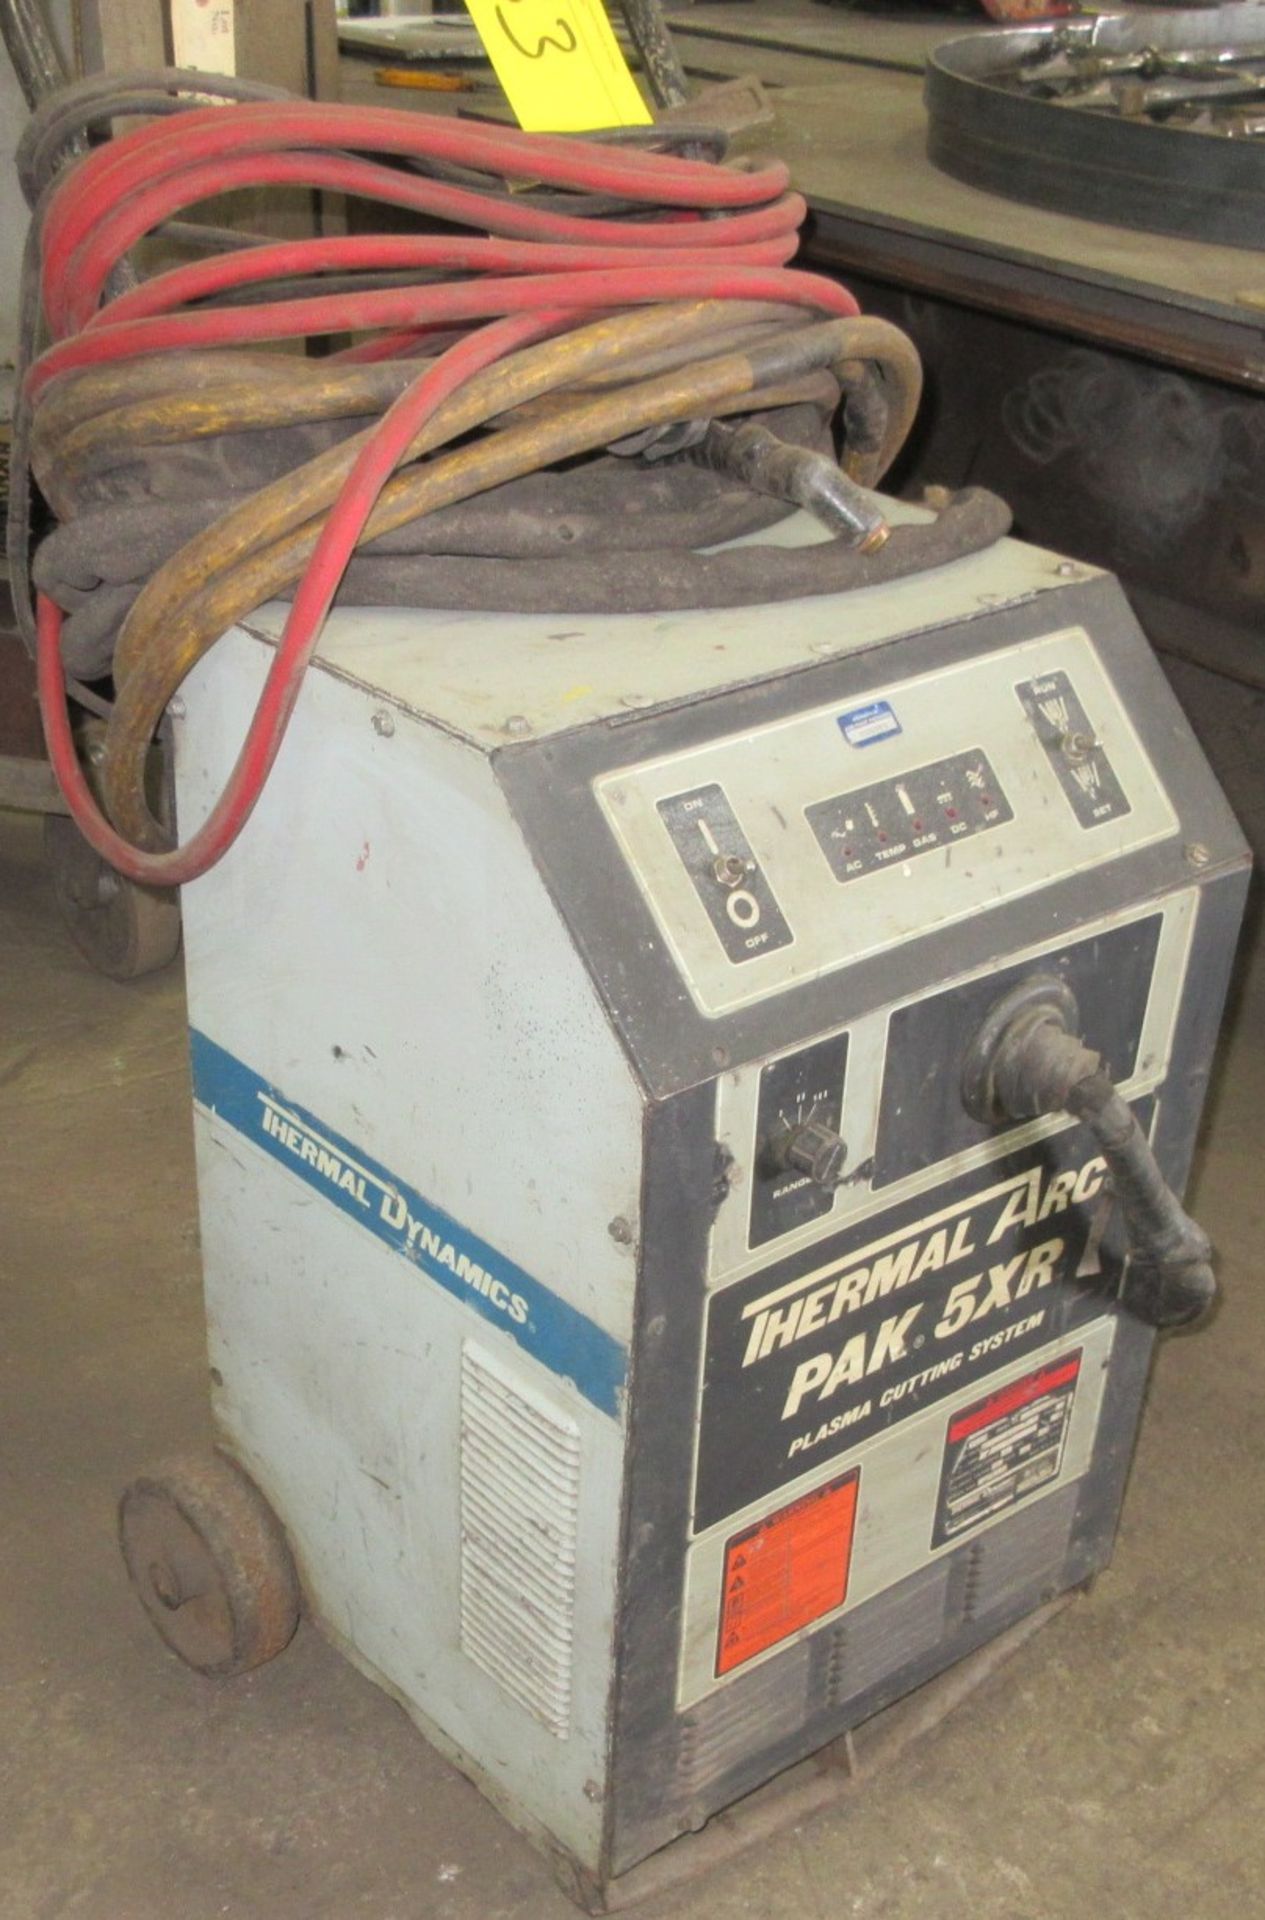 THERMAL ARC PAX 5XR PLASMA CUTTER W/ CART AND CABLES - Image 2 of 4